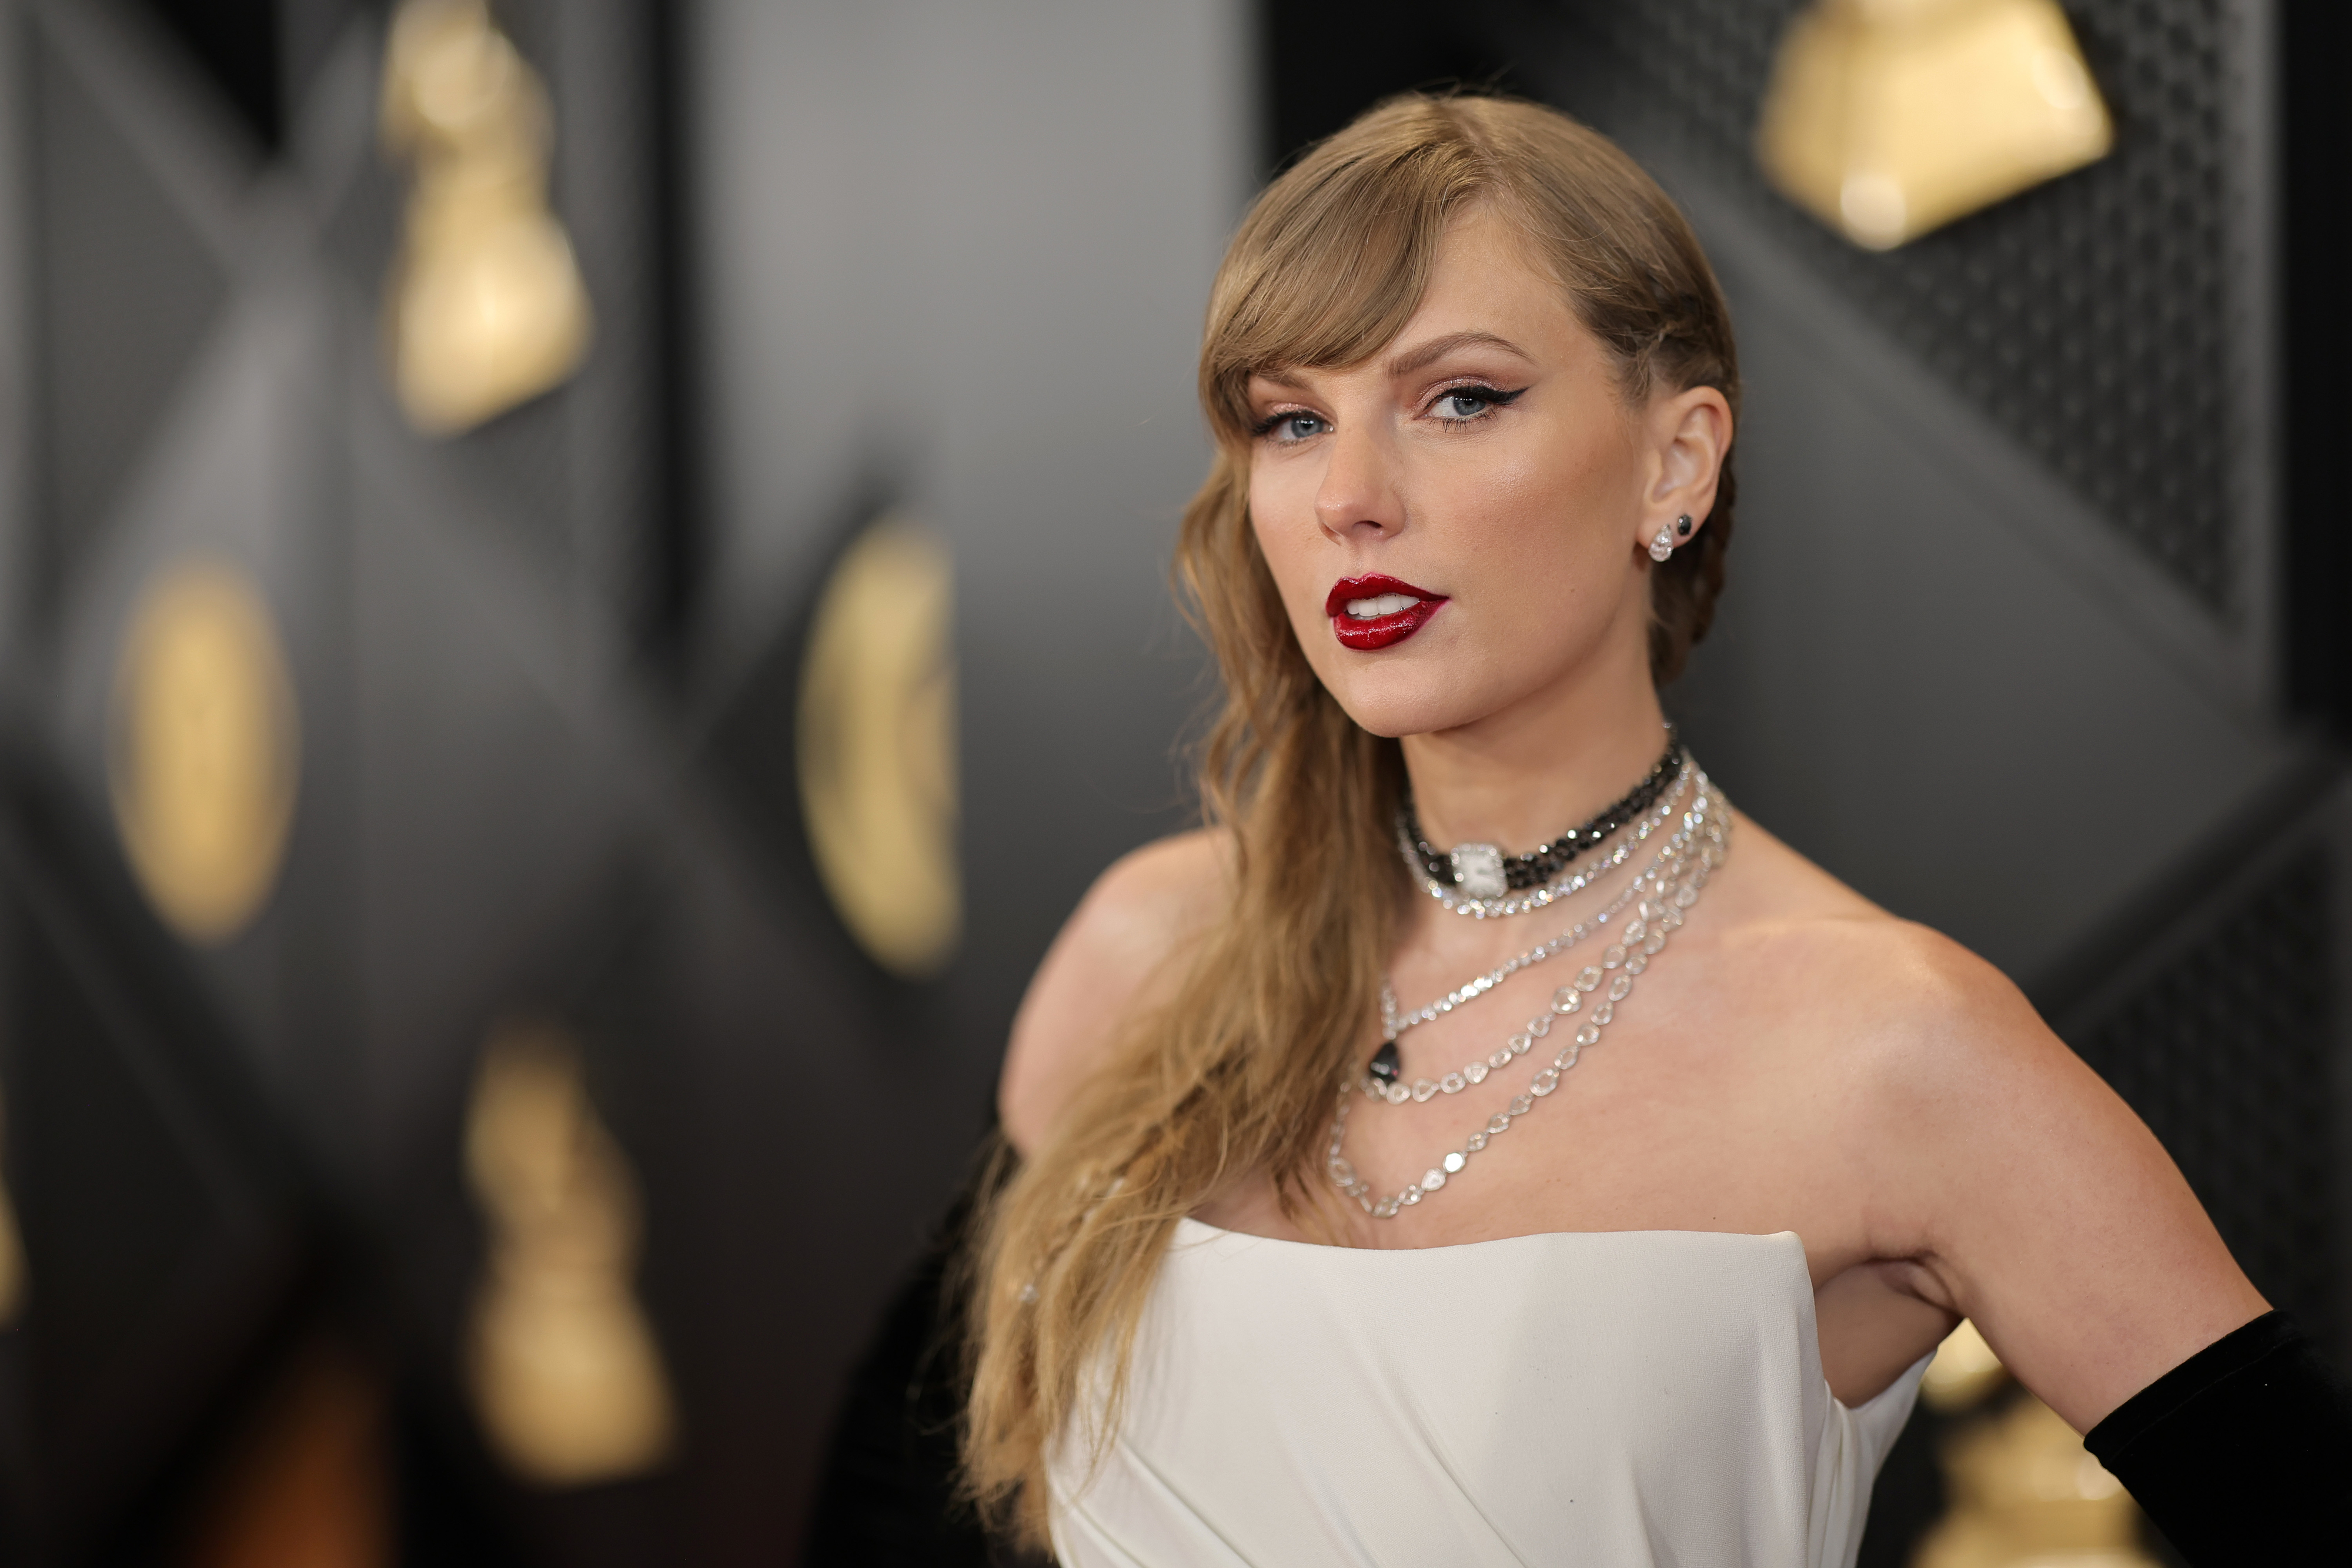 Taylor Swift in an elegant off-shoulder gown with a layered necklace, striking a pose